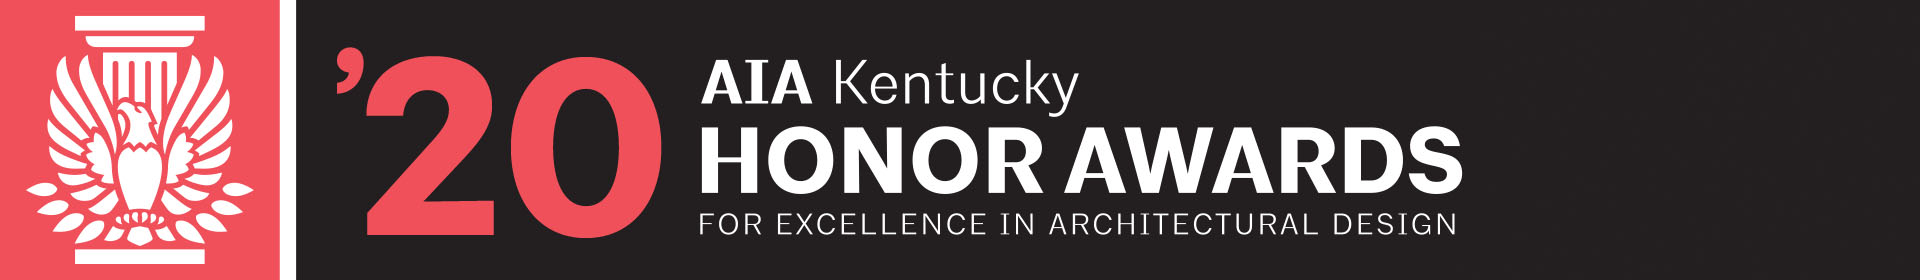 2020 AIA KY Honor Awards for Excellence in Architectural Design Event Banner